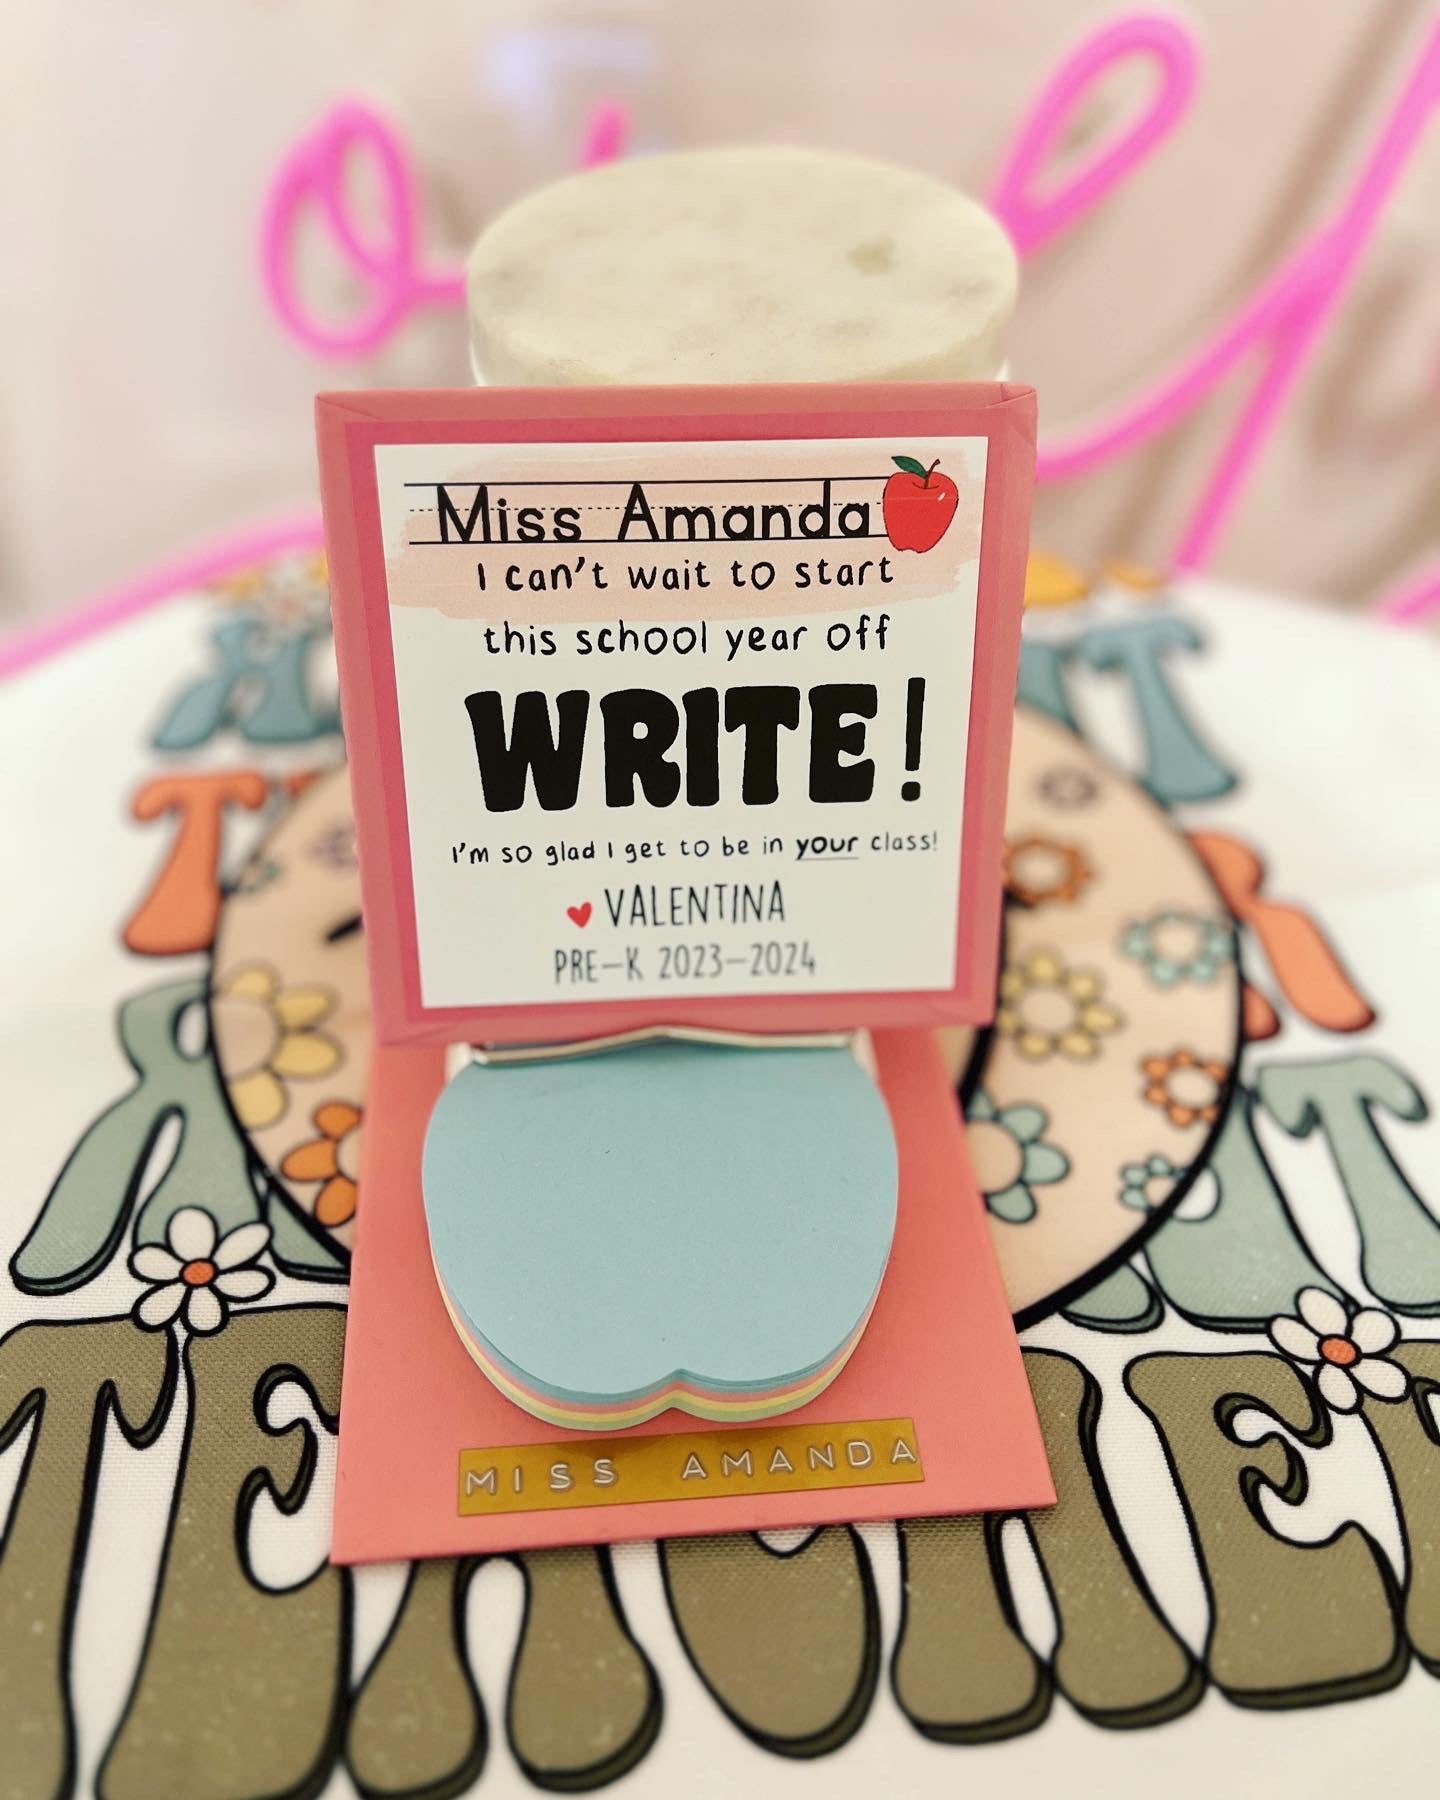 I can't wait to start this year off "write!" First day of school teacher gift!Apple sticky notepad,mini clipboard,personalized card+giftwrap